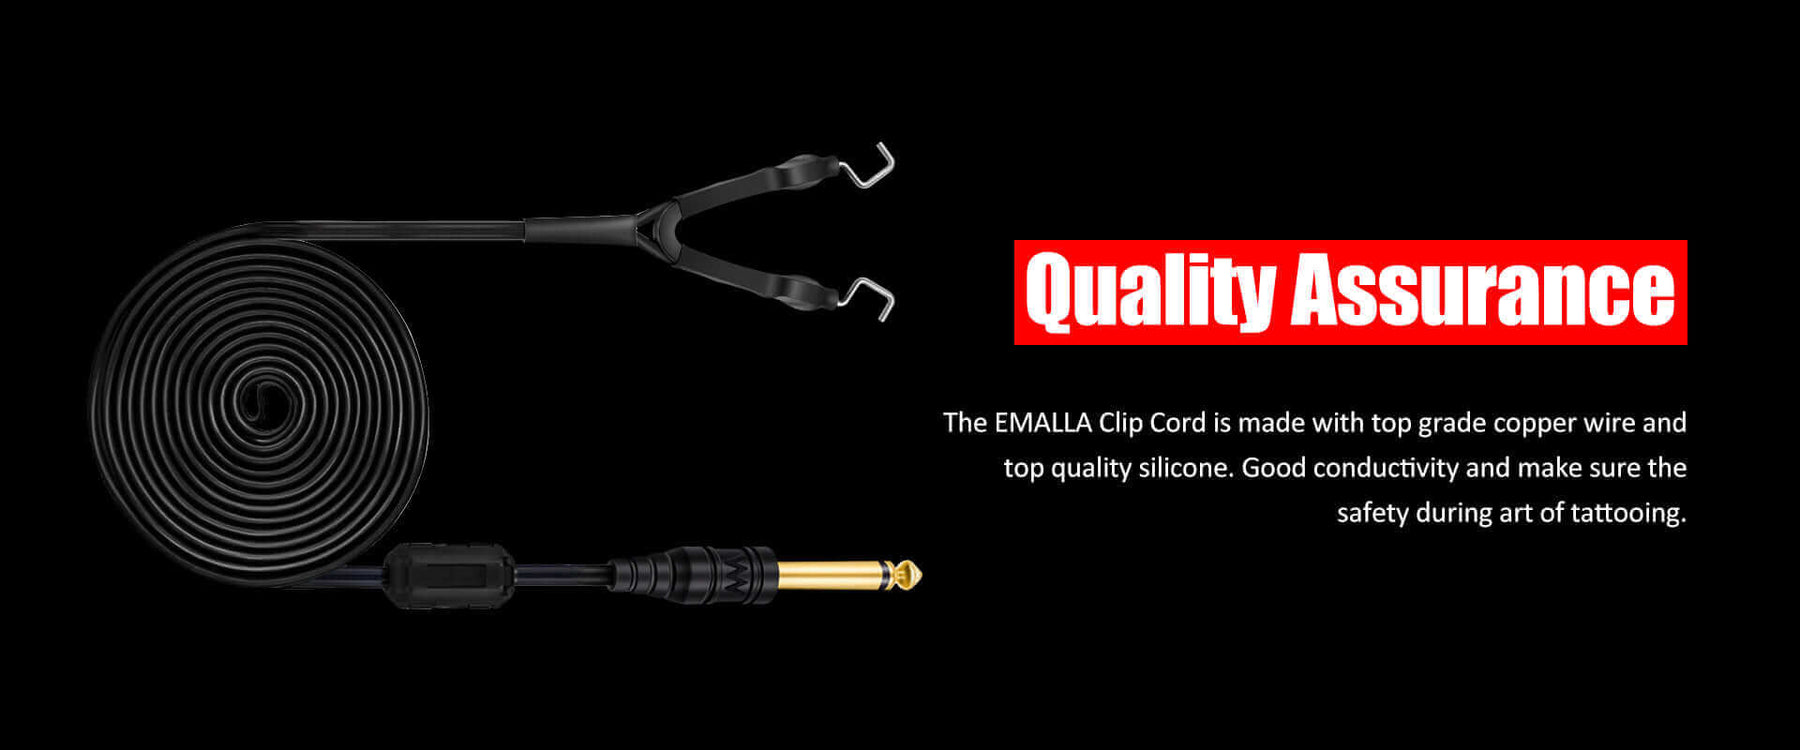 Quality assurance of EMALLA PR2-A Tattoo Clip Cord -7FT Long Professional Silicone Tattoo Machine Cables Hook Line